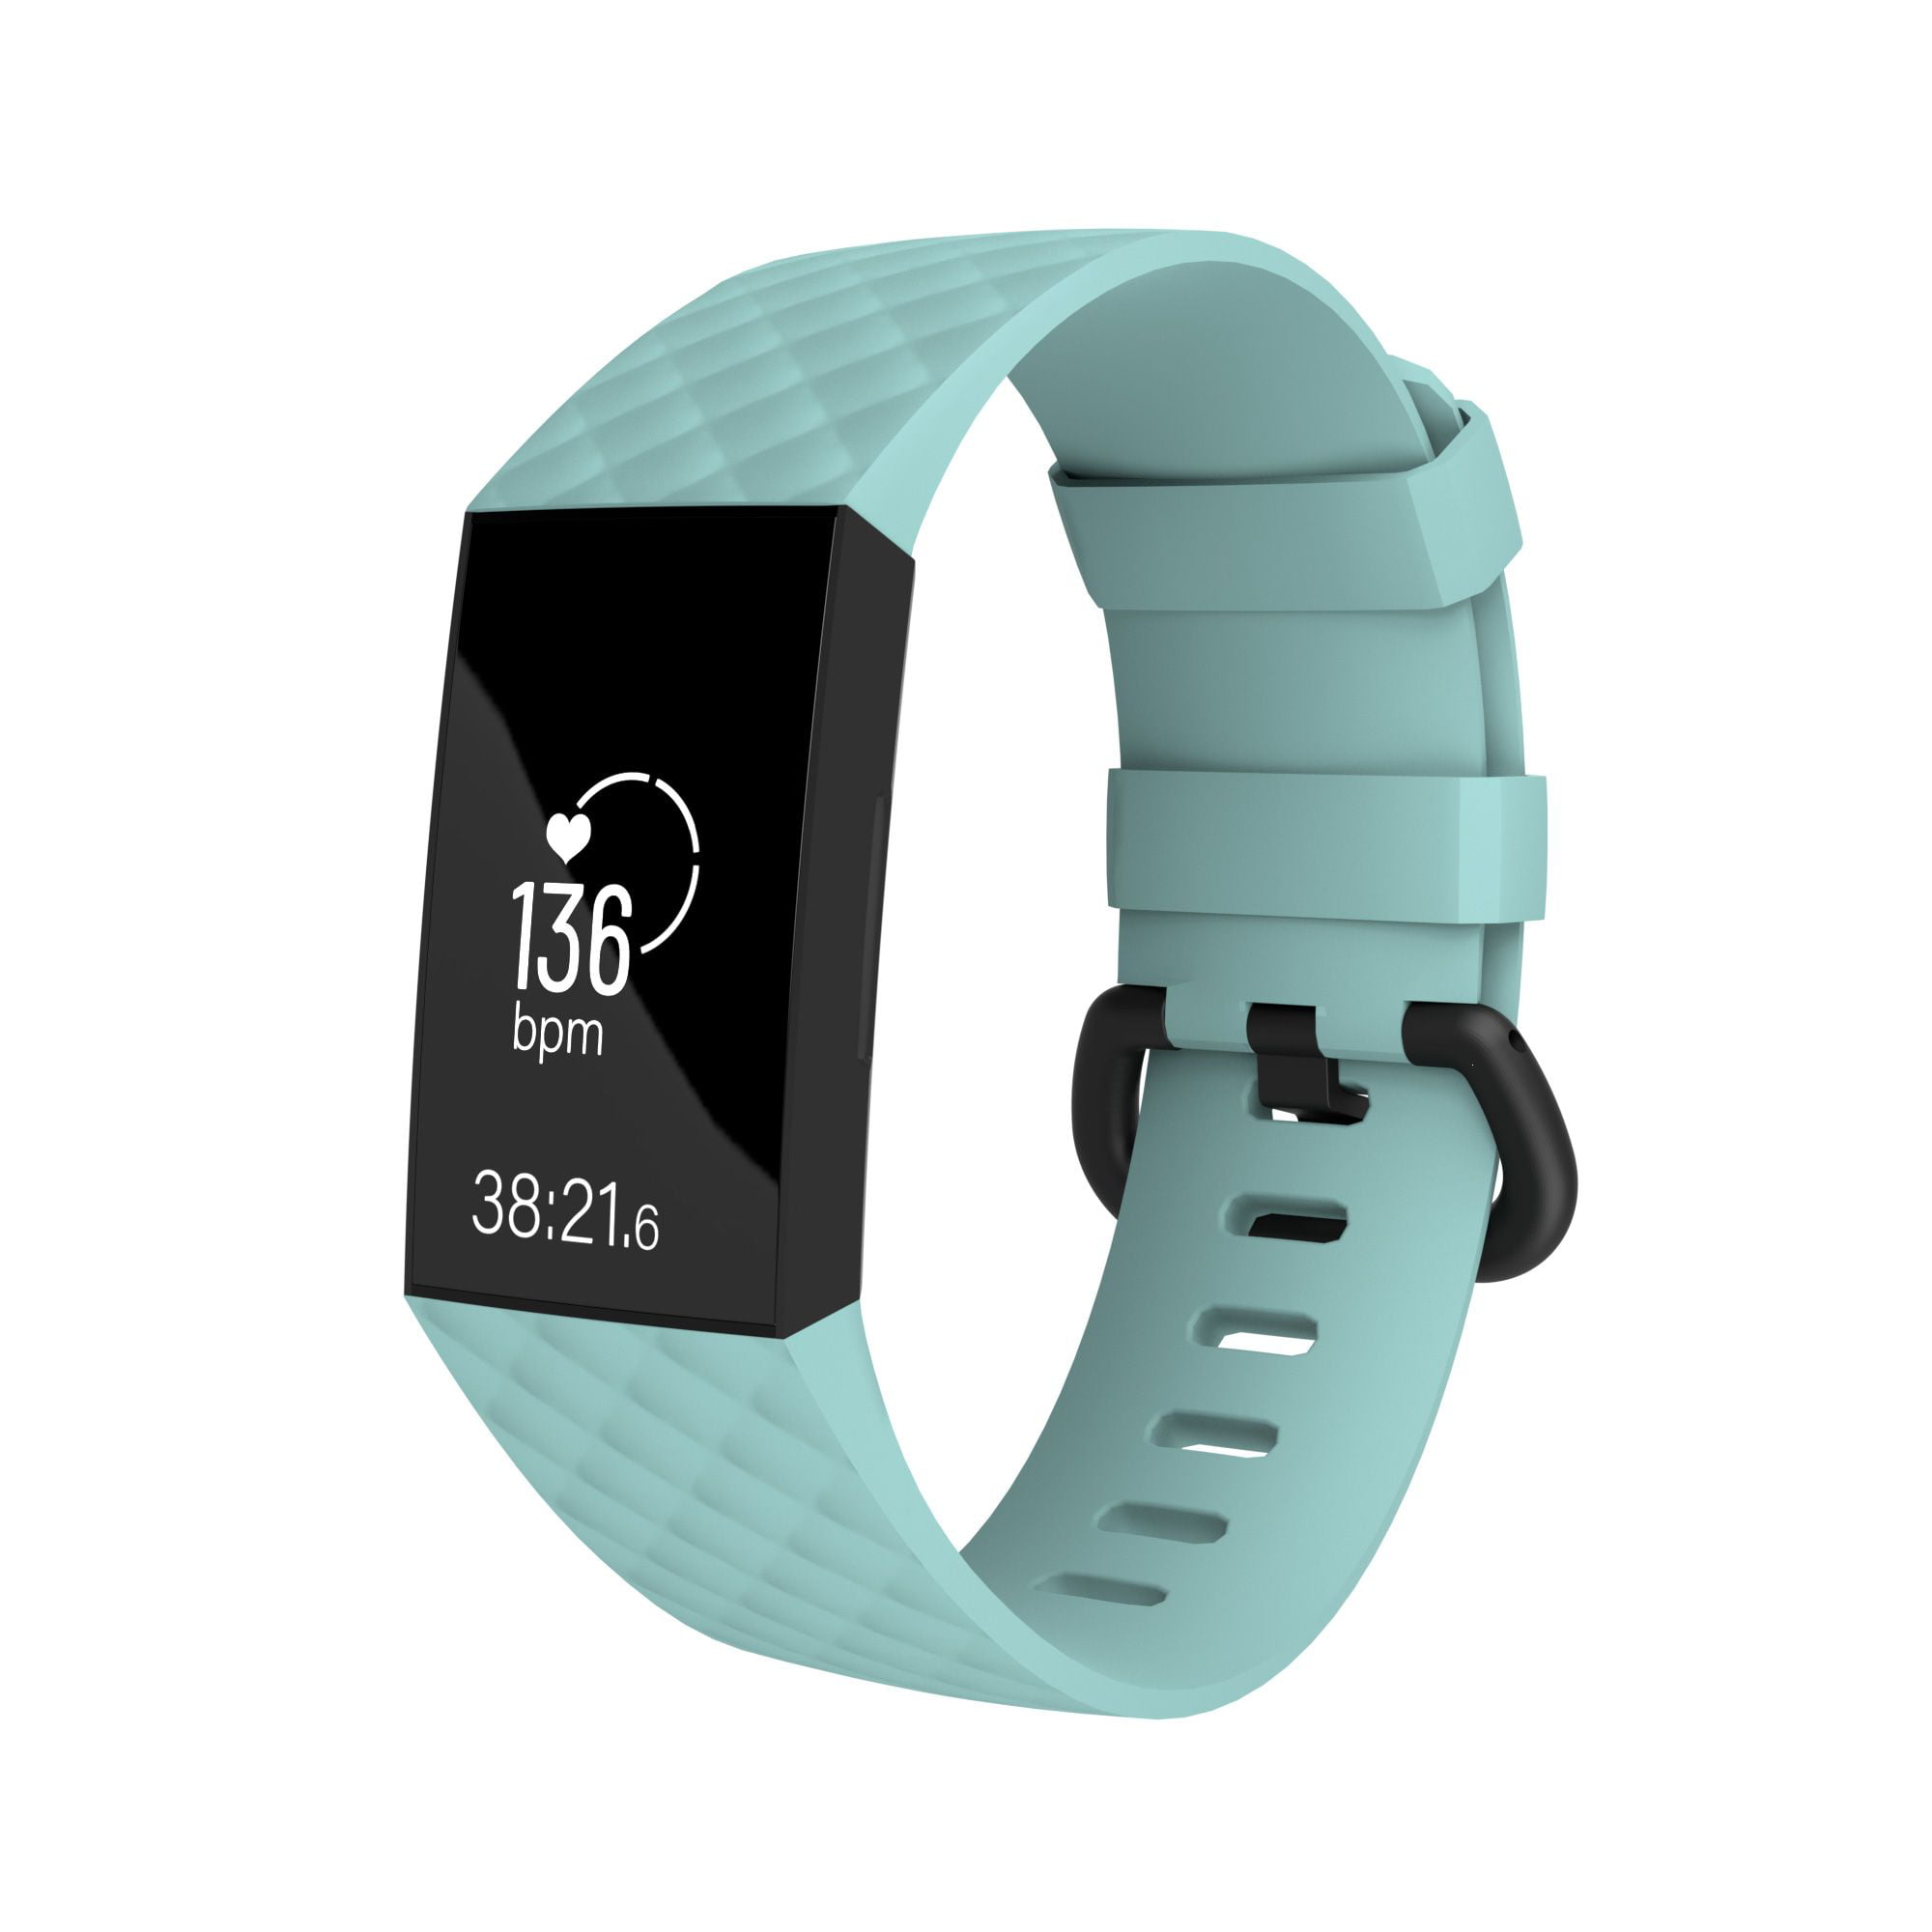 fitbit charge 3 fitness watch